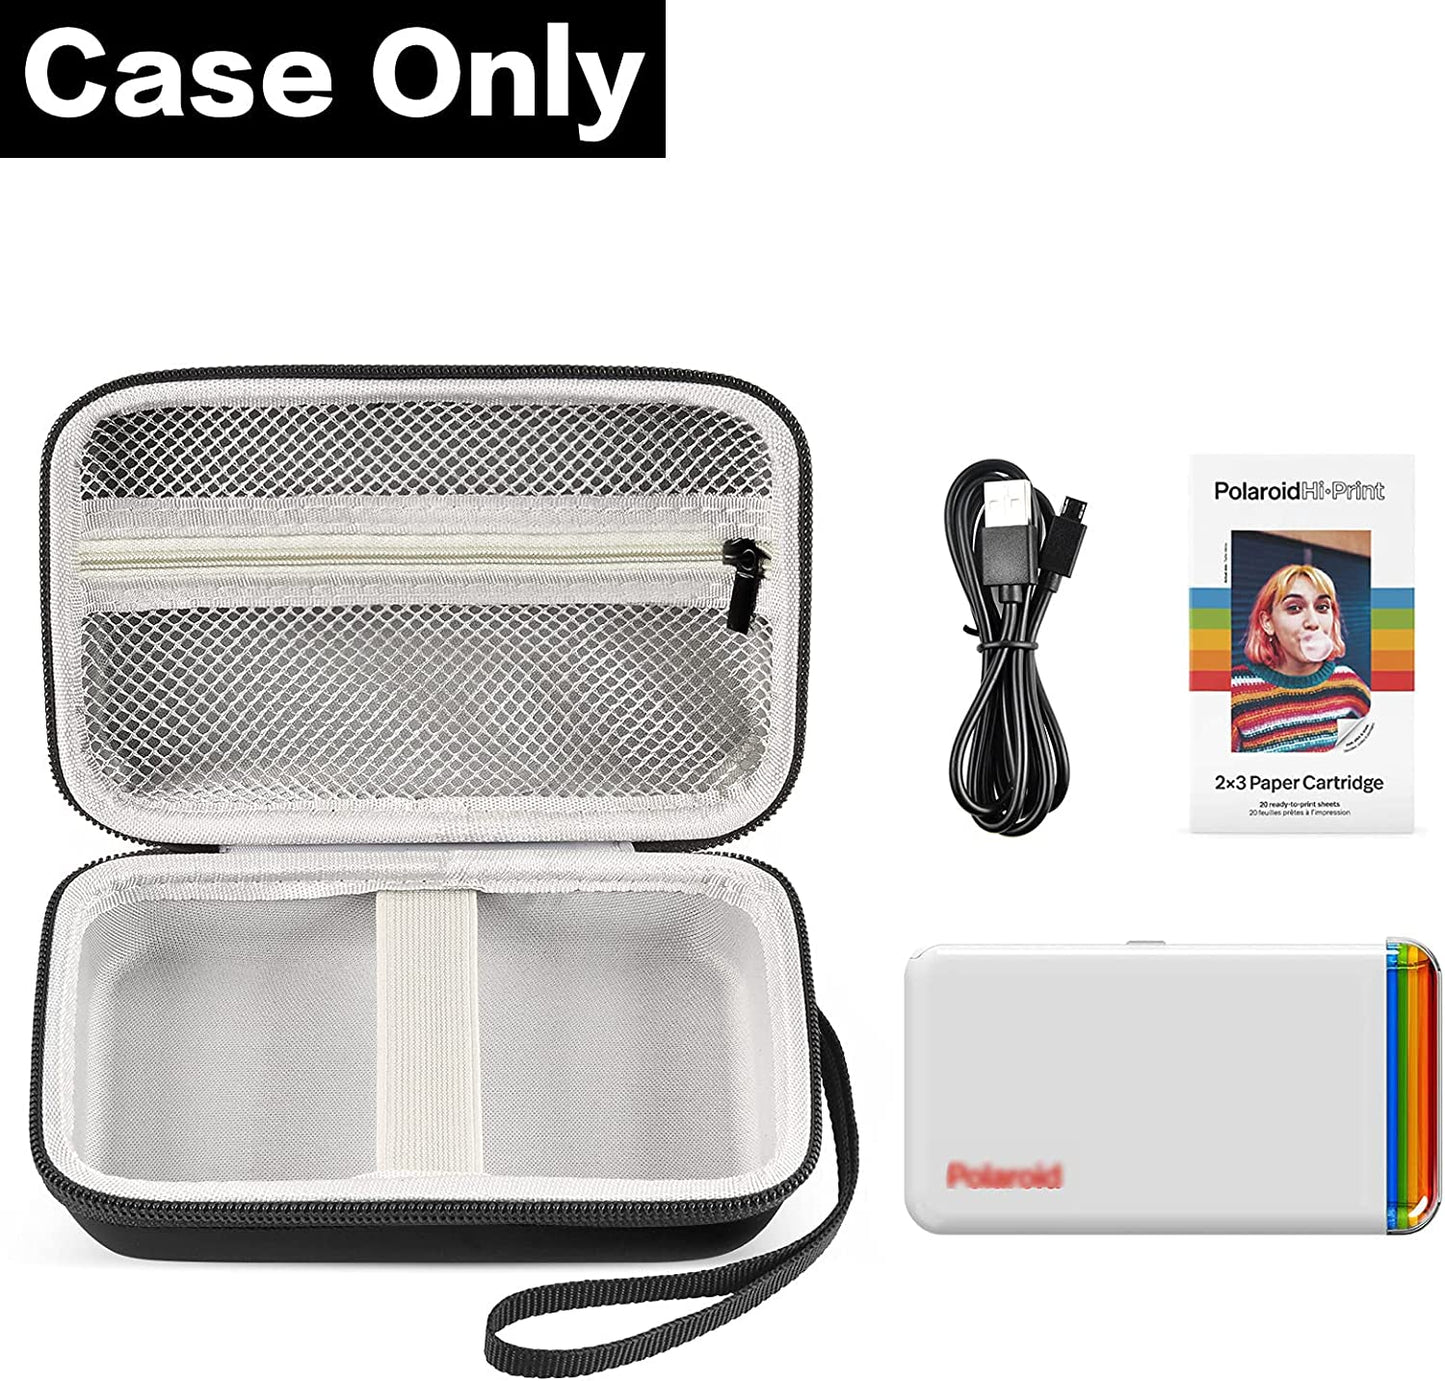 Case Compatible with Polaroid Hi-Print 9046 Bluetooth Connected 2x3 Pocket Photo Printer, Travel Pocket Picture Printer Organizer Holder Bag for Paper Cartridges and More Accessories(Box Only)